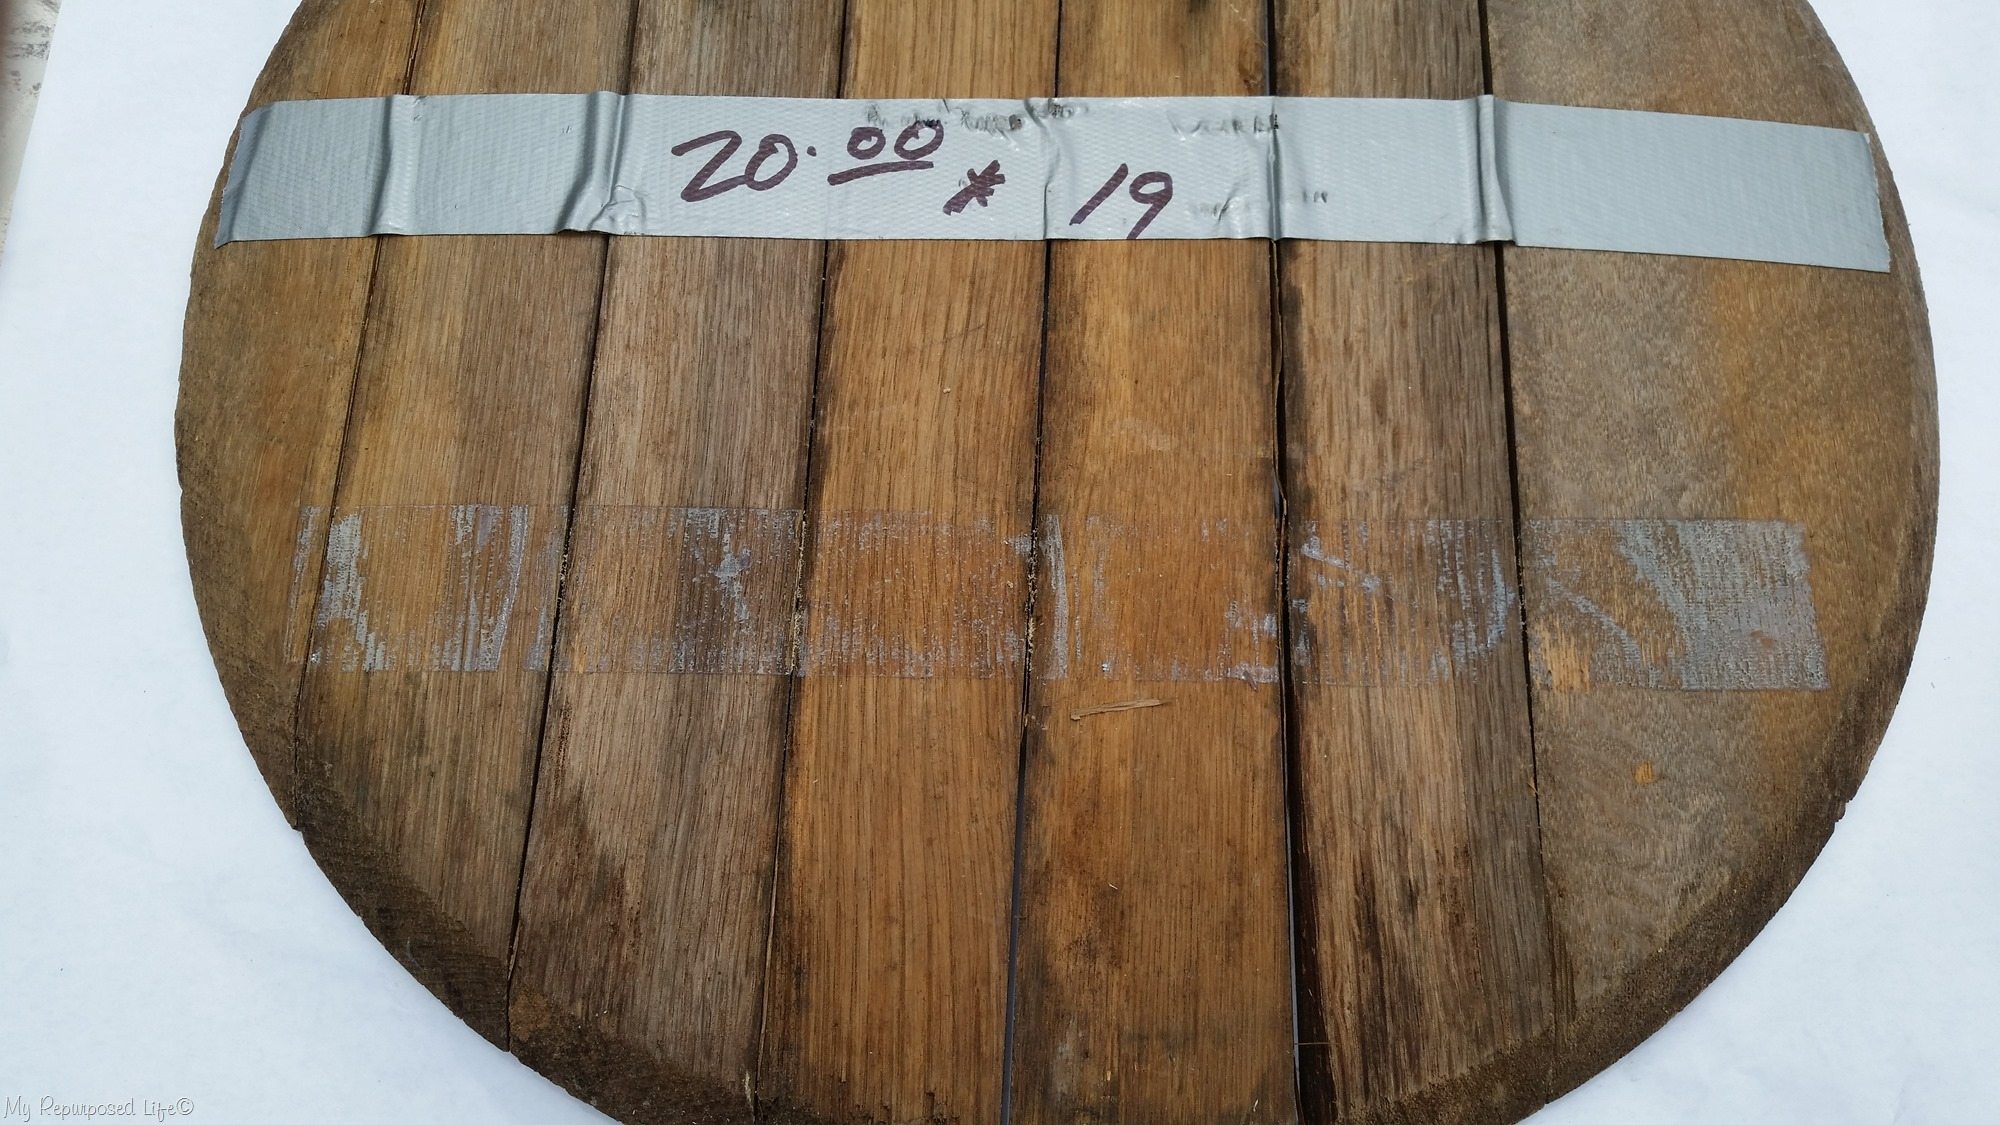 whiskey barrel lid taped